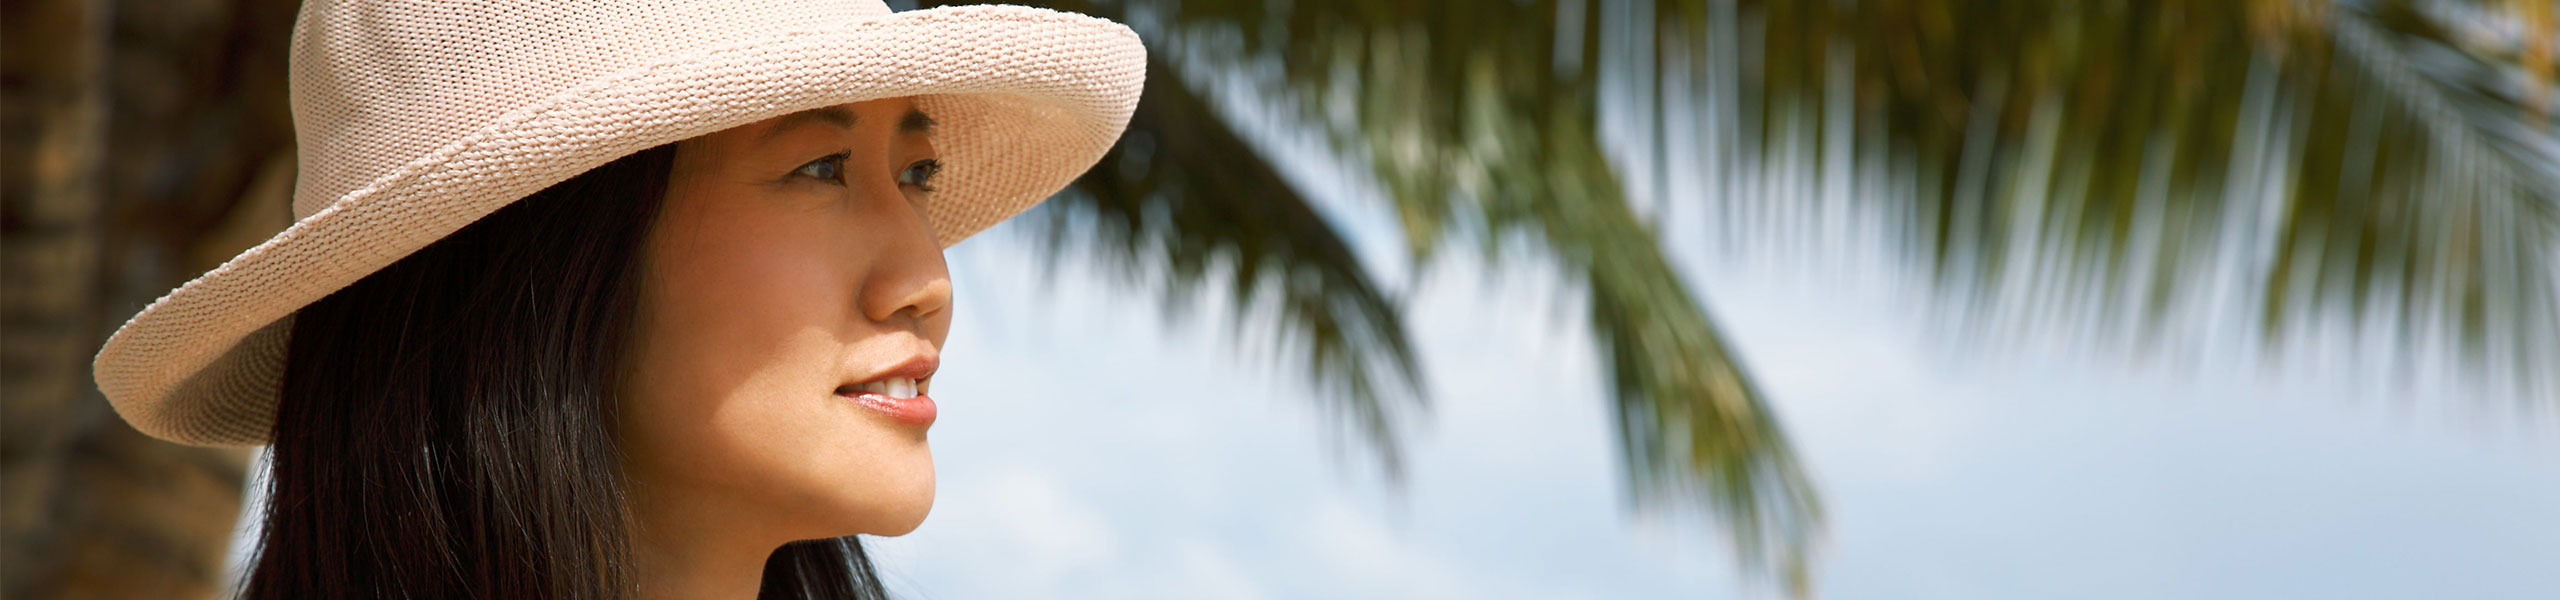 Person in a sun hat standing next to a palm tree